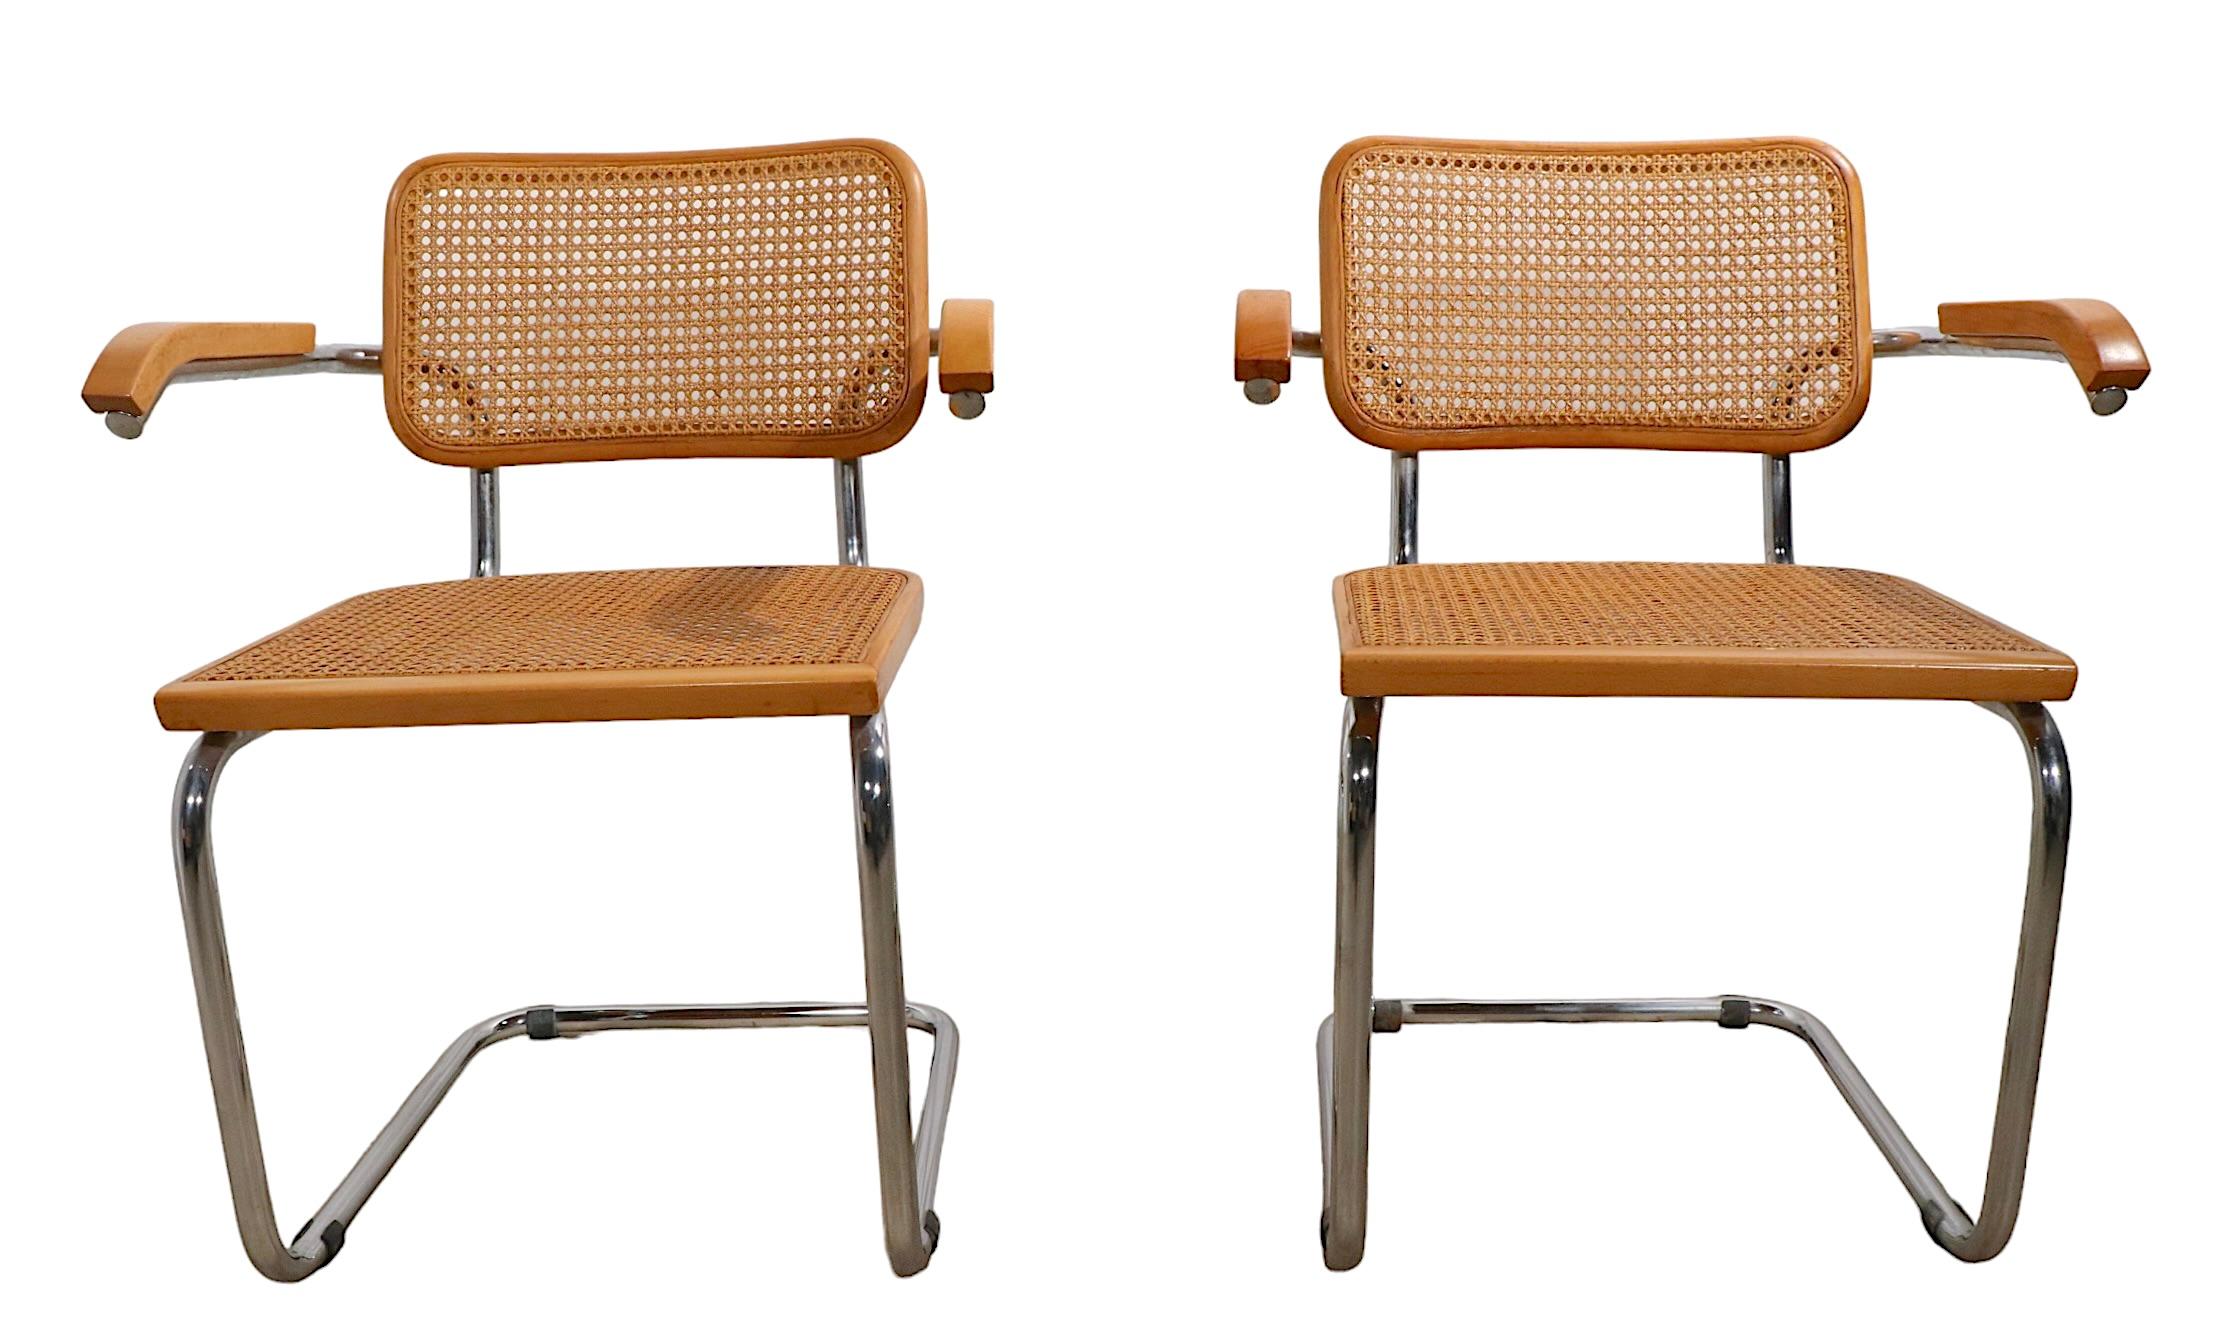 International Style Pr. Breuer Cesca Chairs Made in Italy, C 1970's